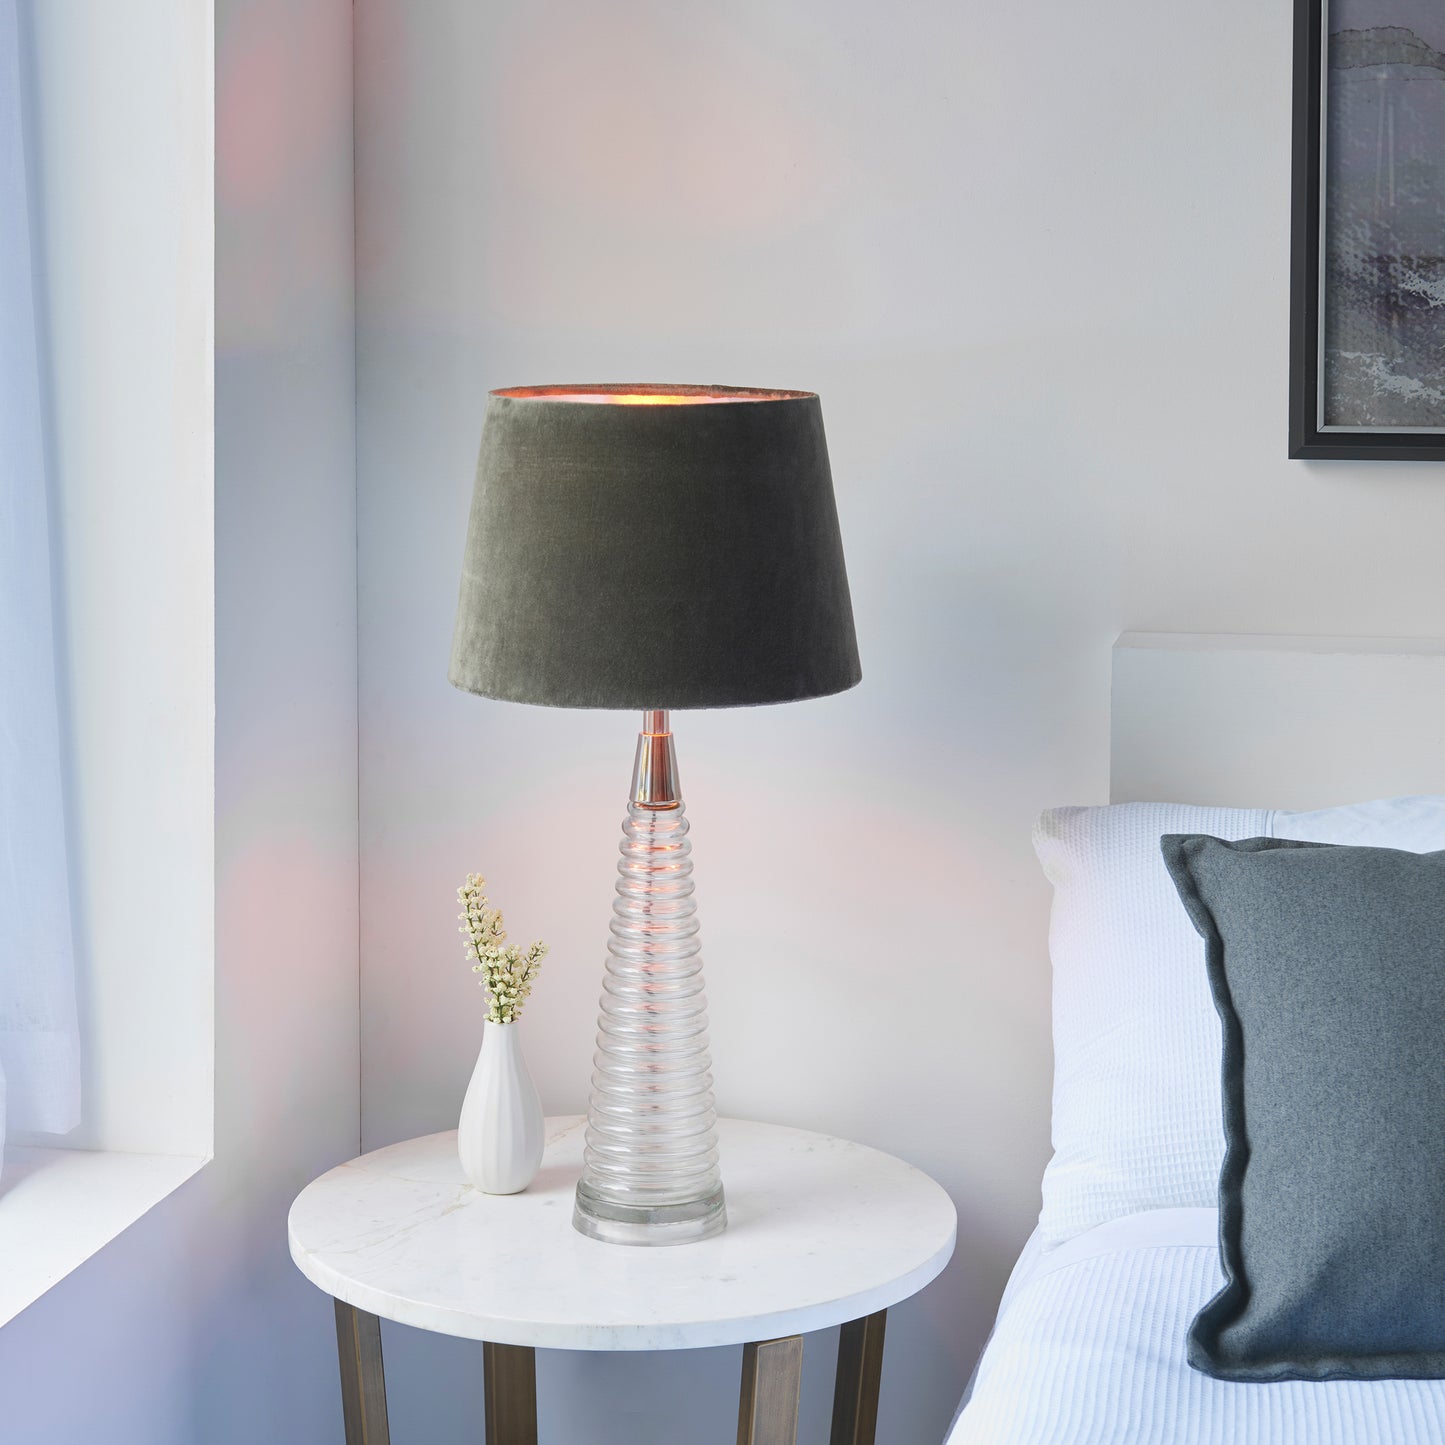 A Naia 1 Table Light Clear Glass & Mocha by Kikiathome.co.uk as home furniture in a room with interior decor.